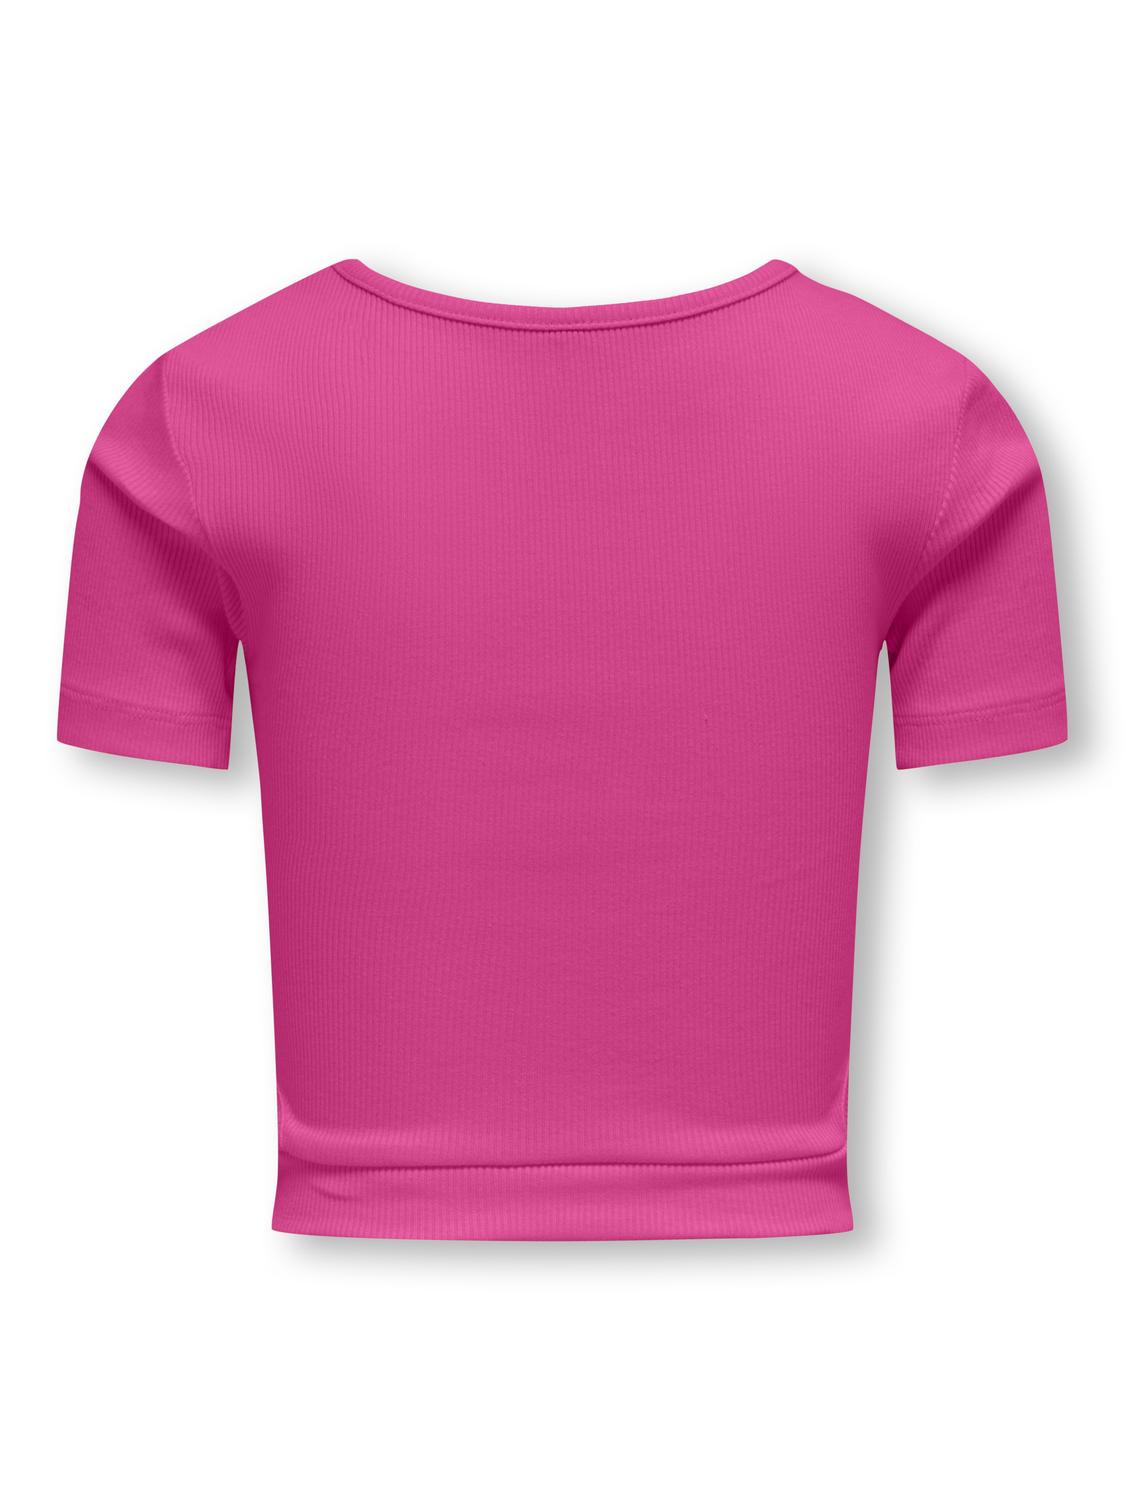 ONLY Top Tight Fit Paricollo -Raspberry Rose - 15313690